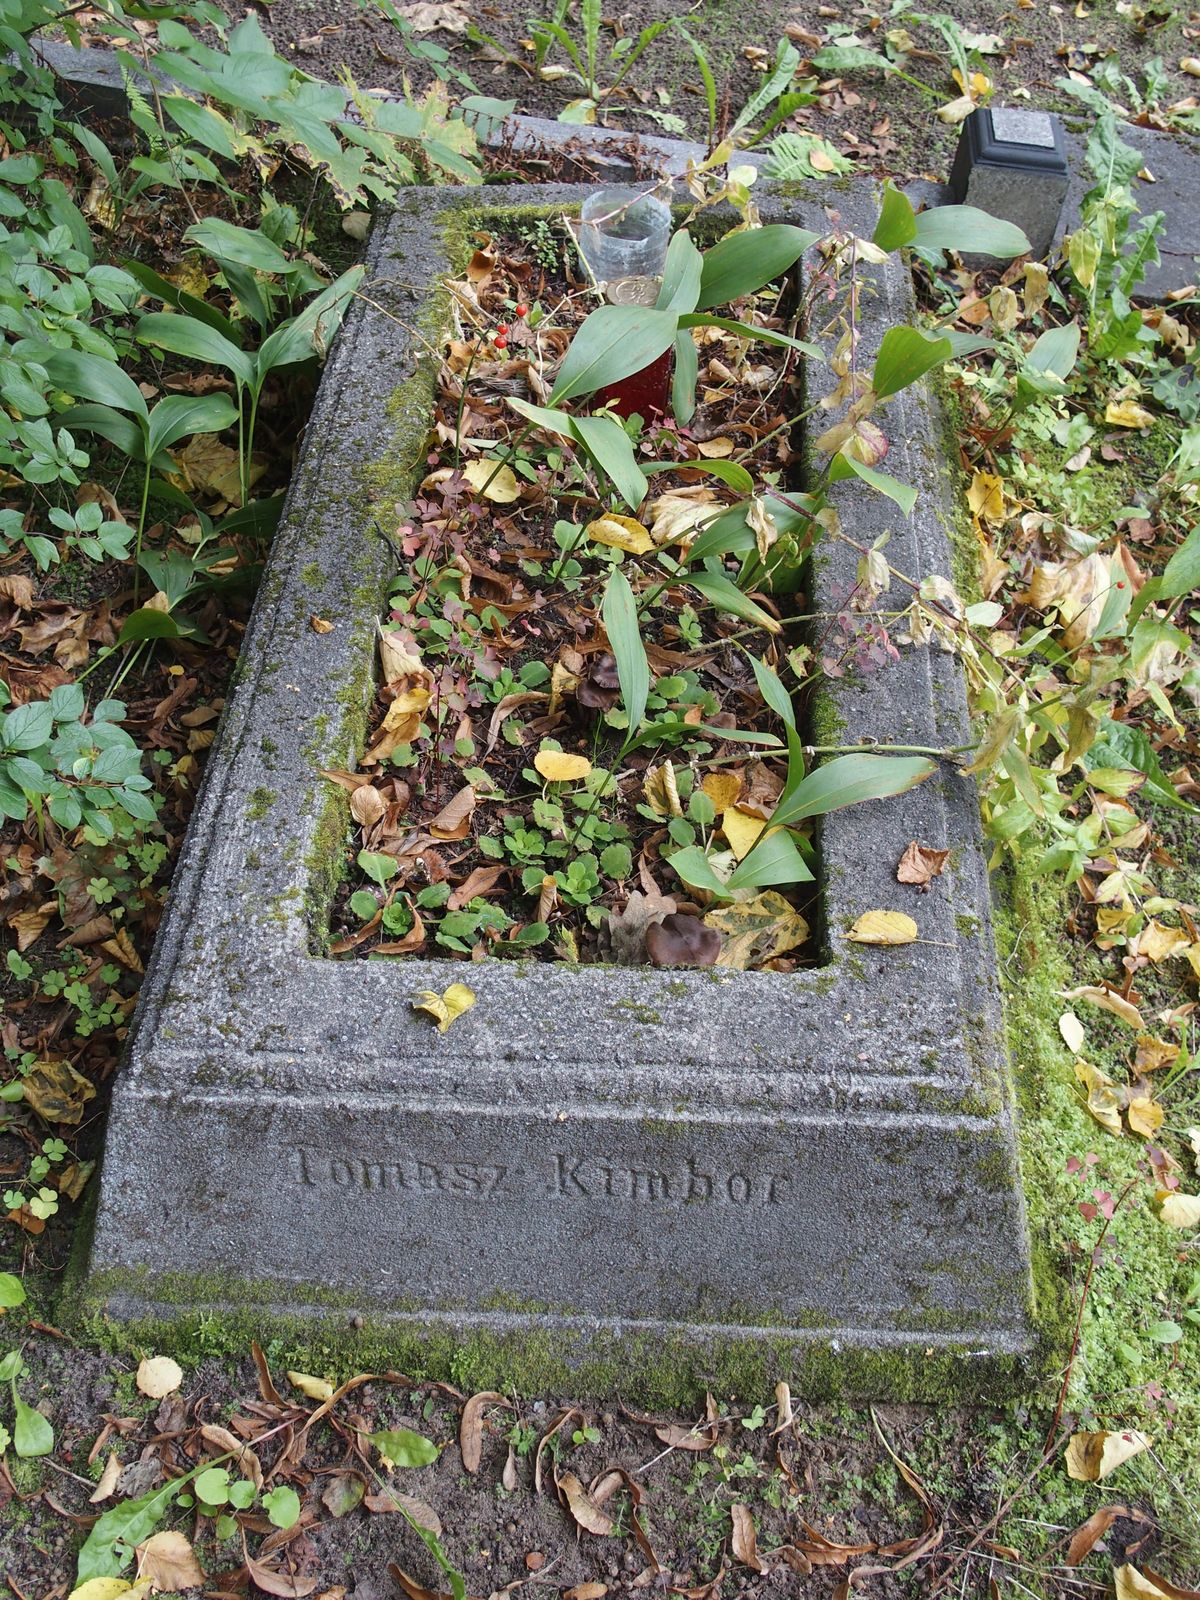 Tomas Kimbor's tombstone, St Michael's cemetery in Riga, as of 2021.